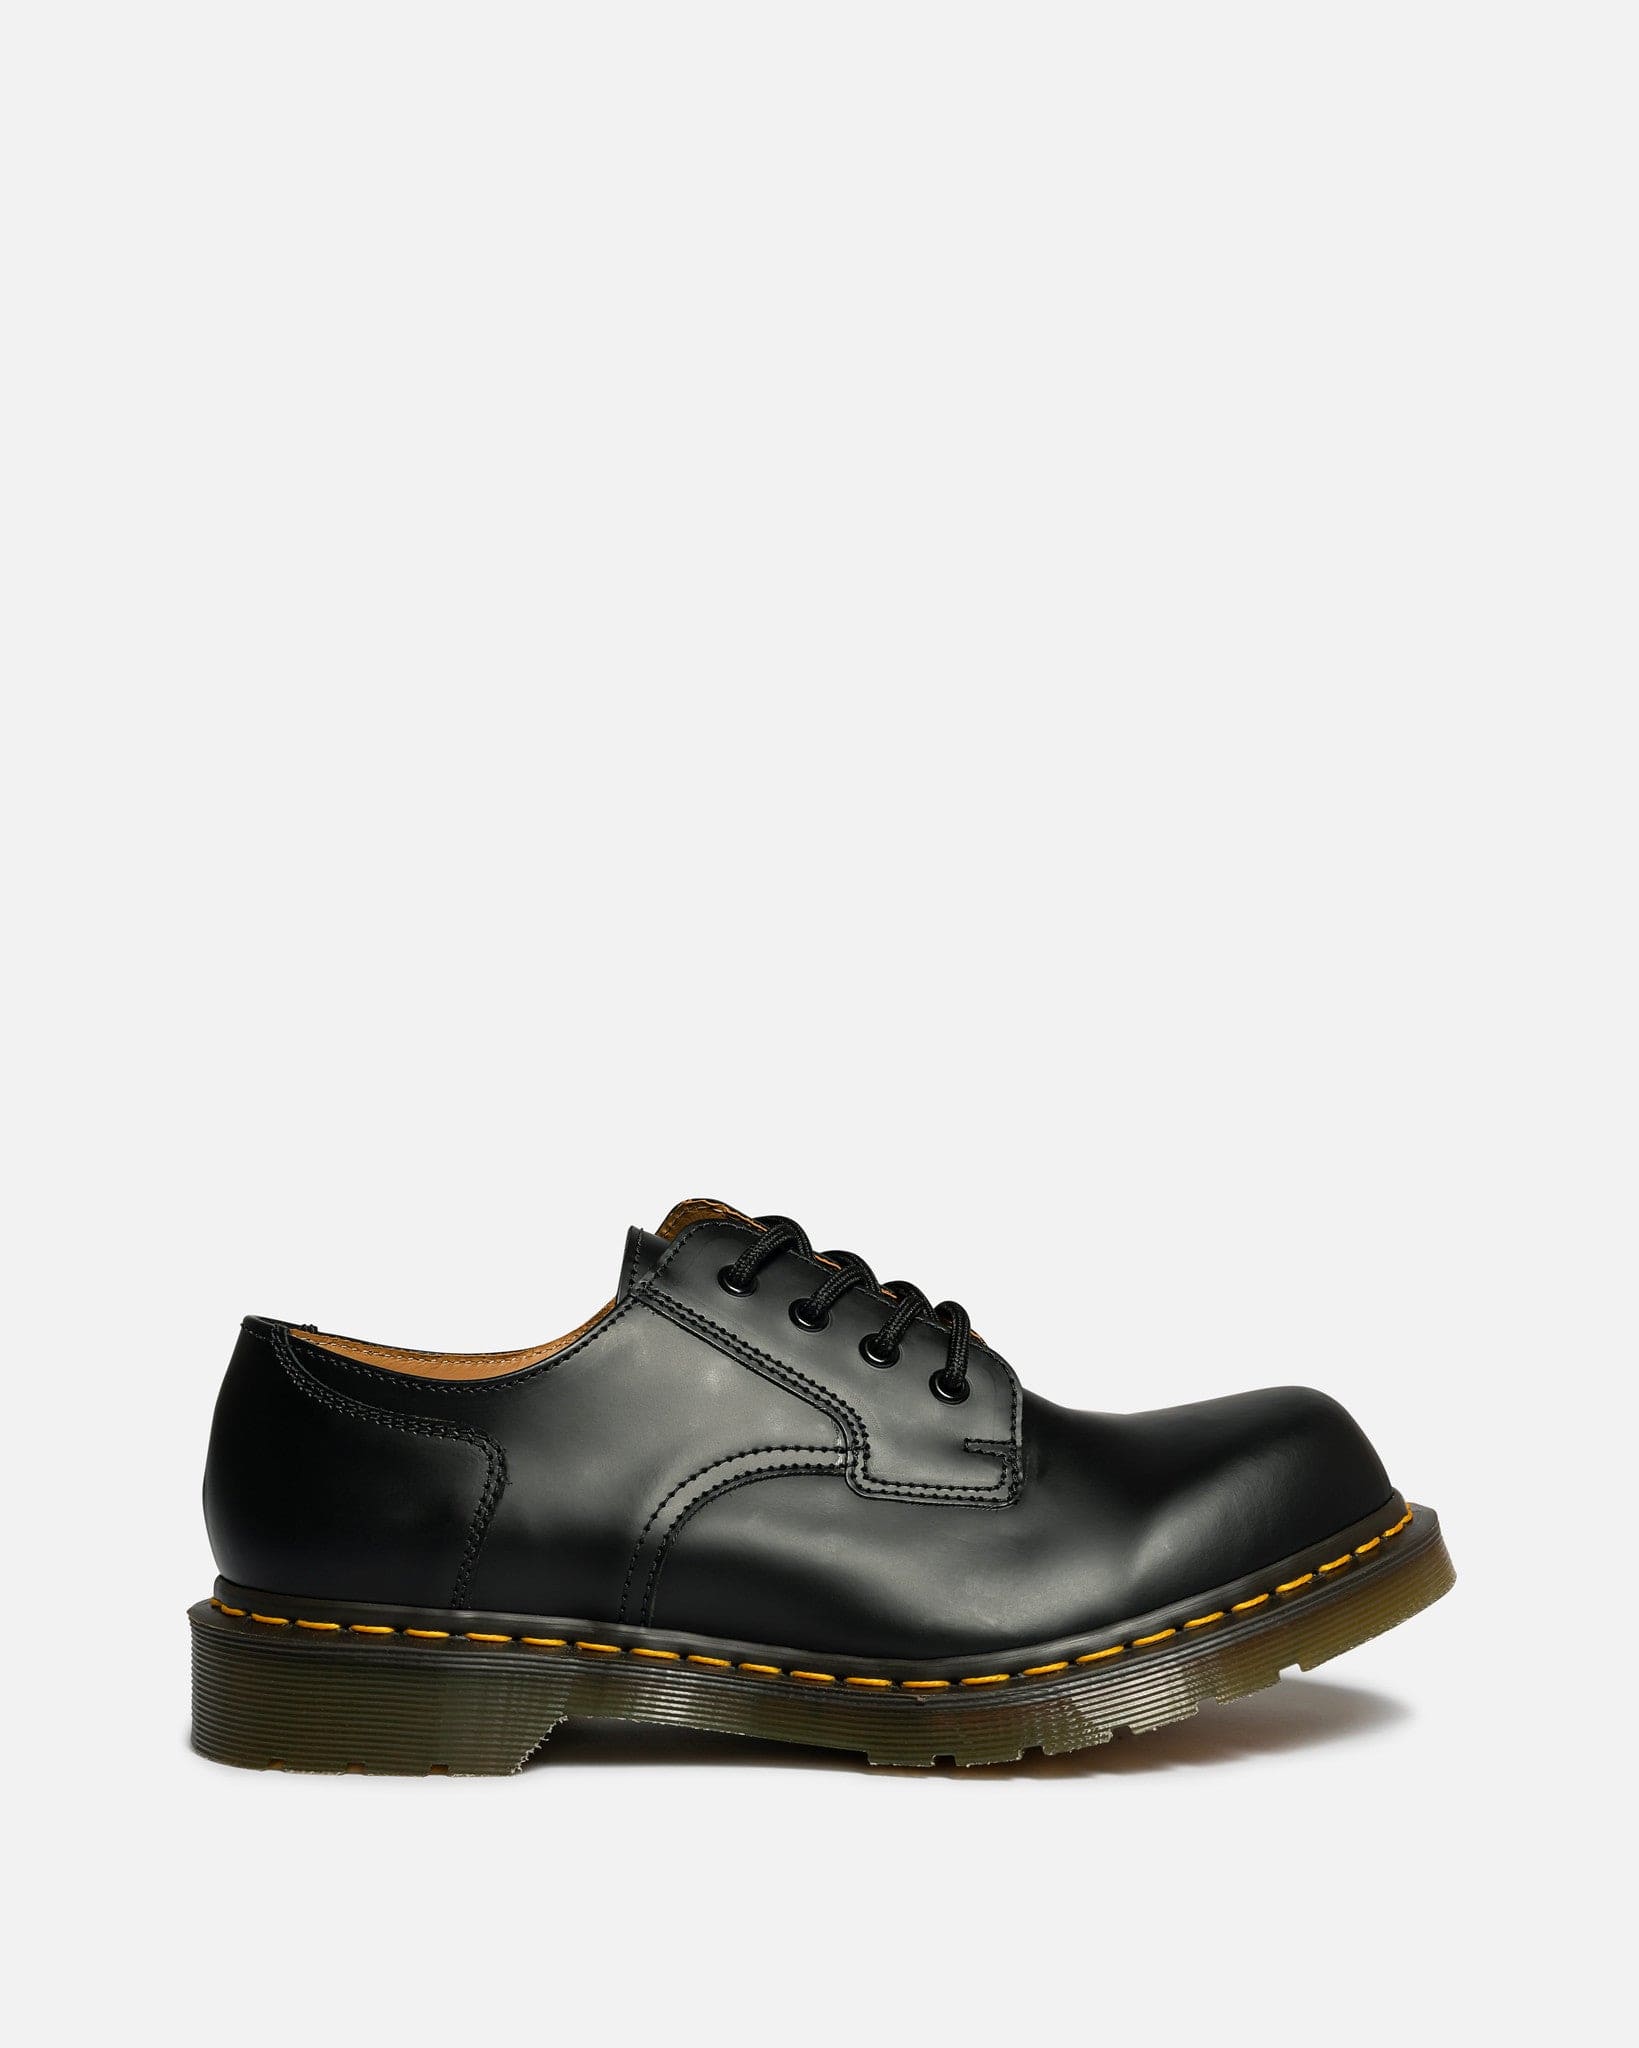 Dr. Martens 9814 Smooth Leather Shoe in Black